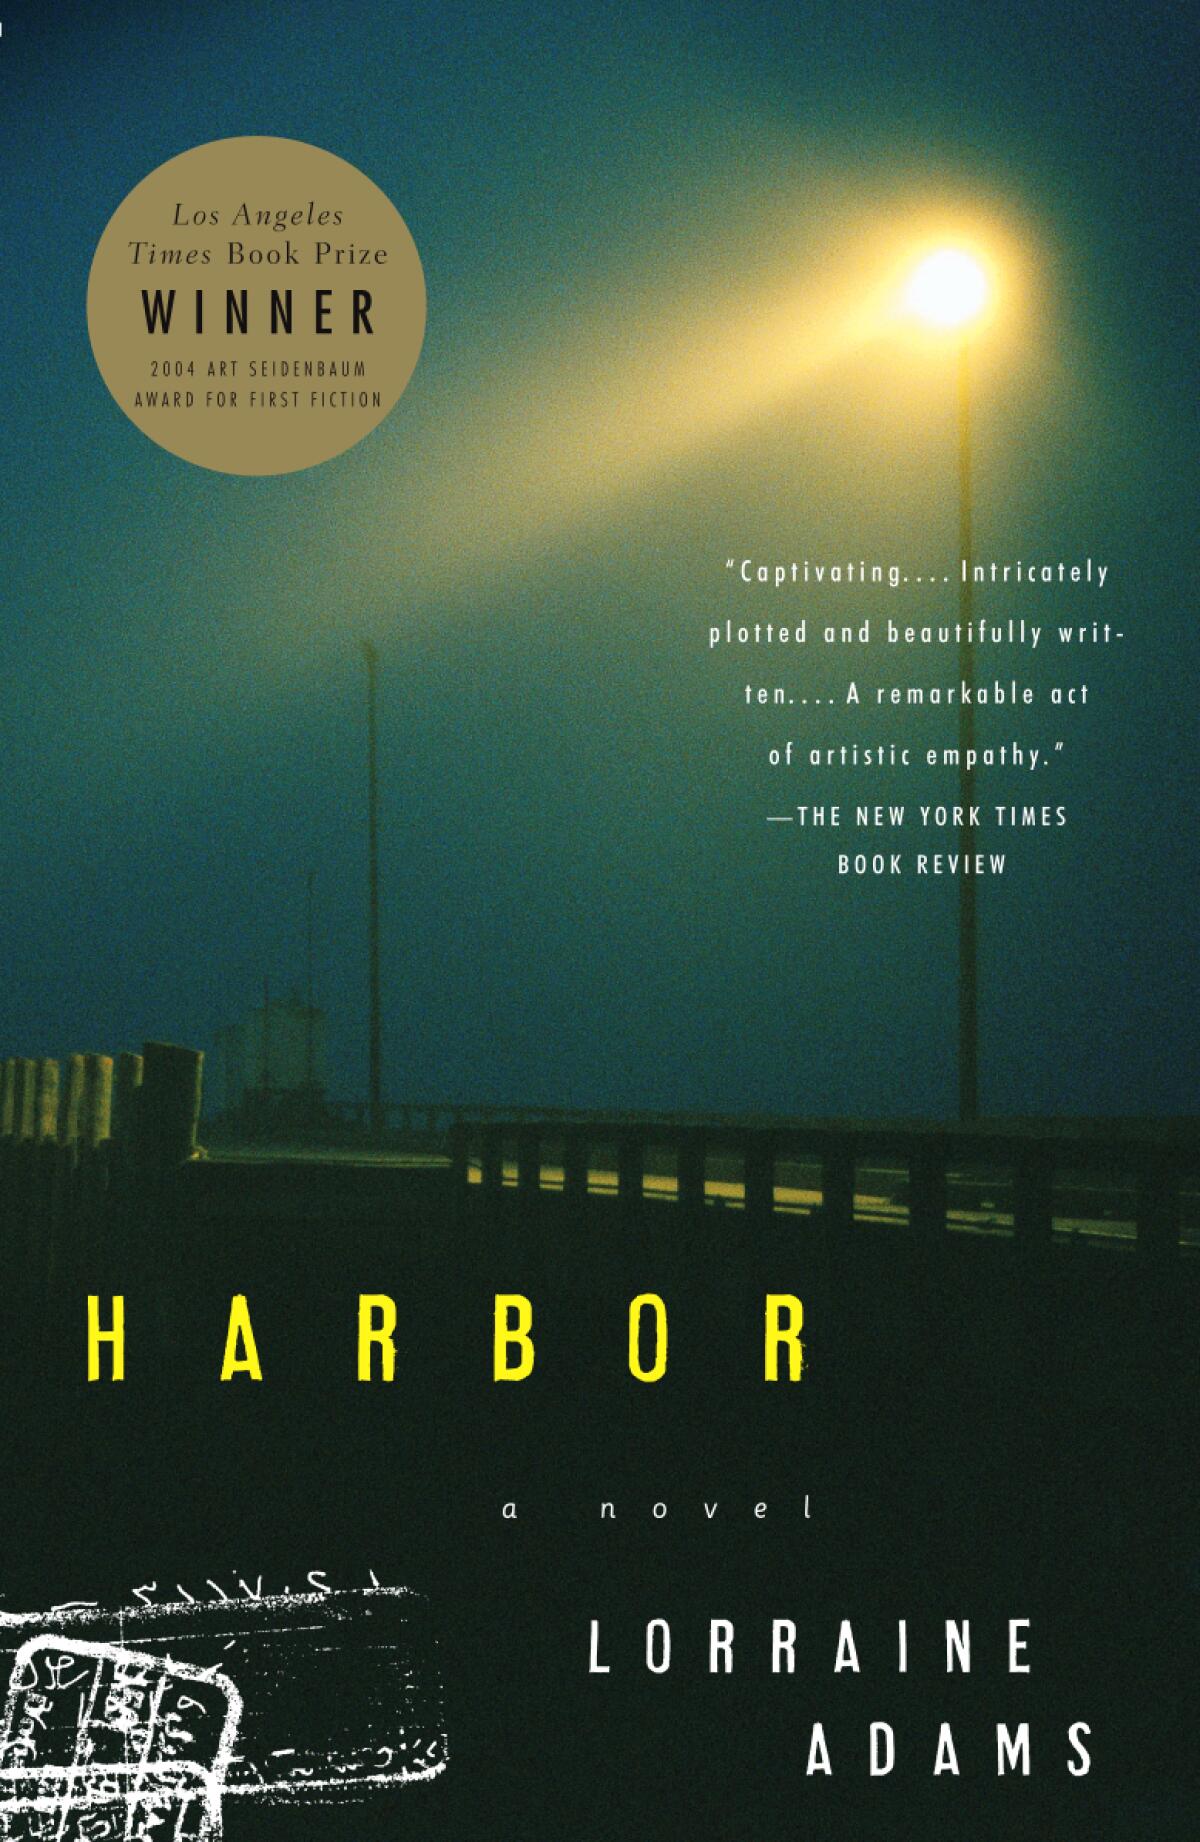 Book jacket for "Harbor" by Lorraine Adams.